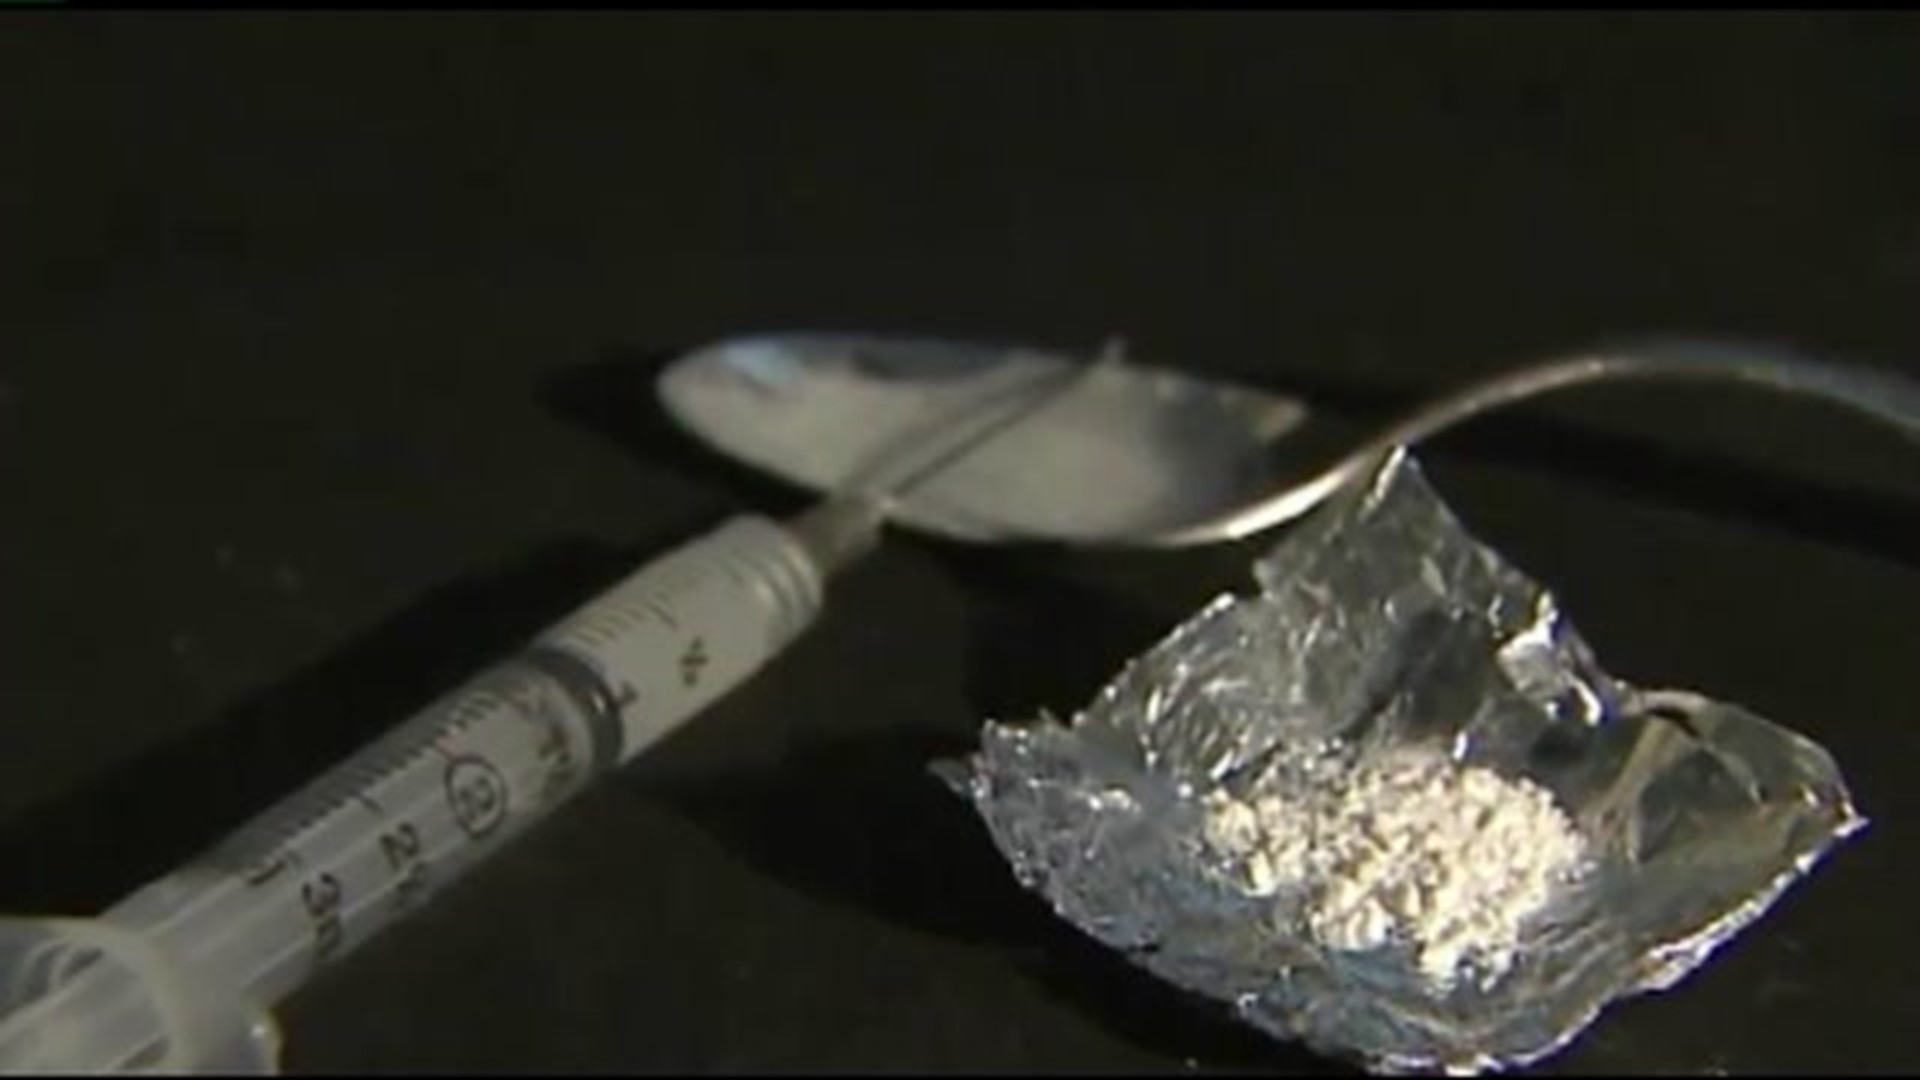 Deadly heroin hits south shore